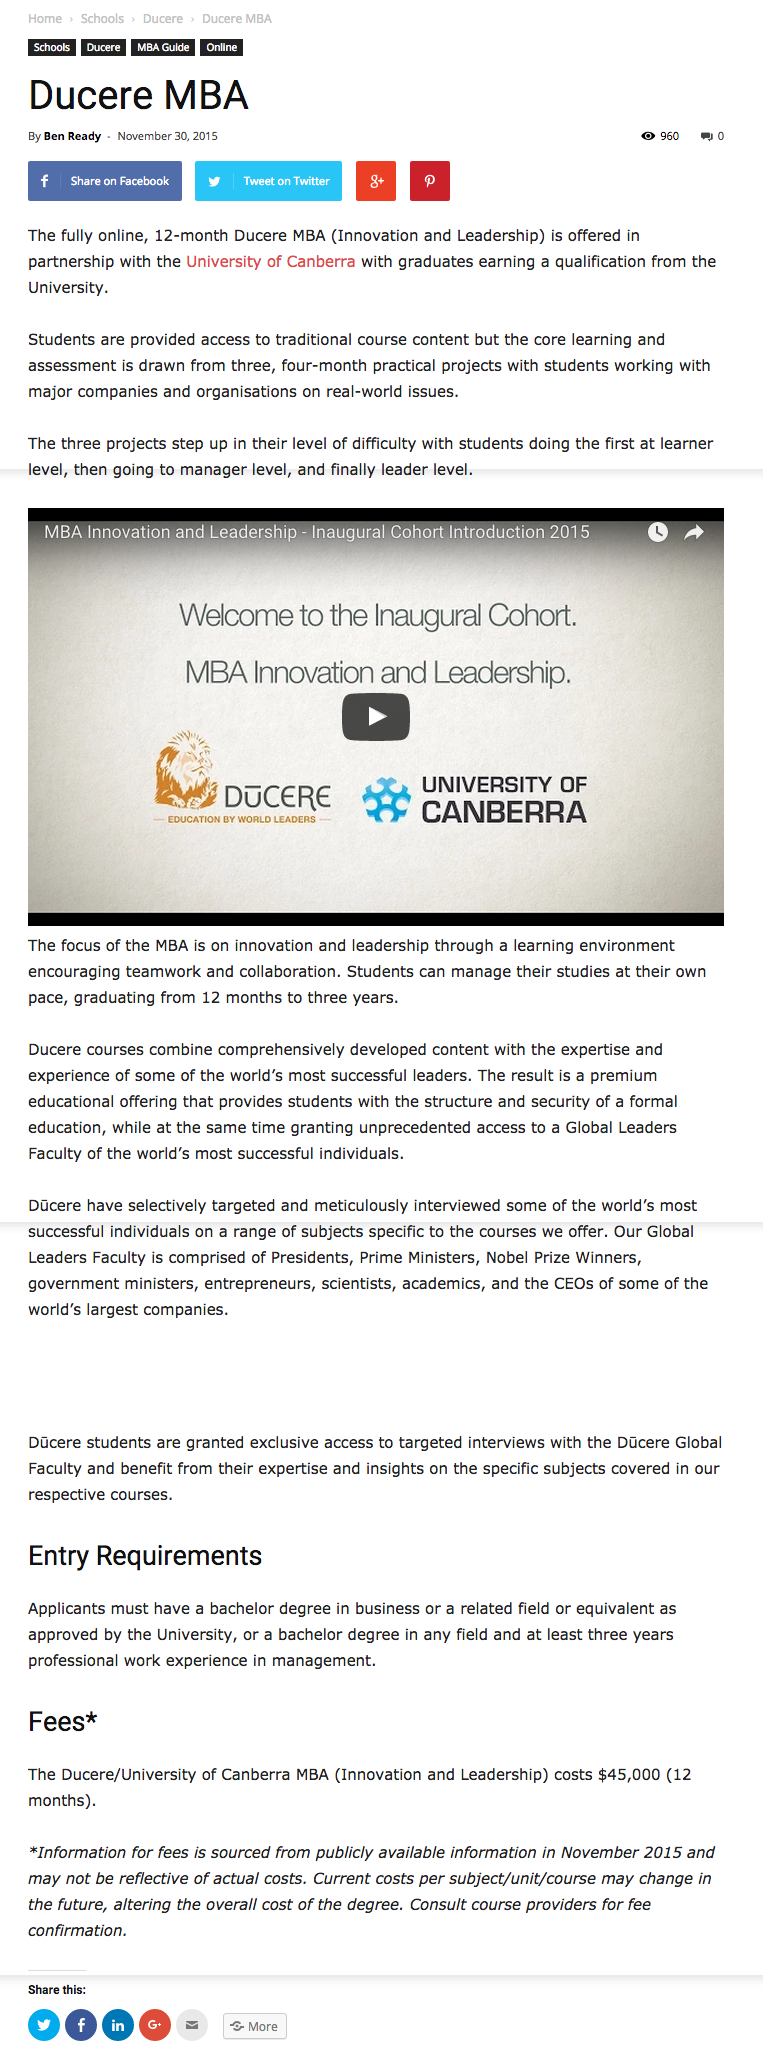 Ducere MBA in MBA News Australia